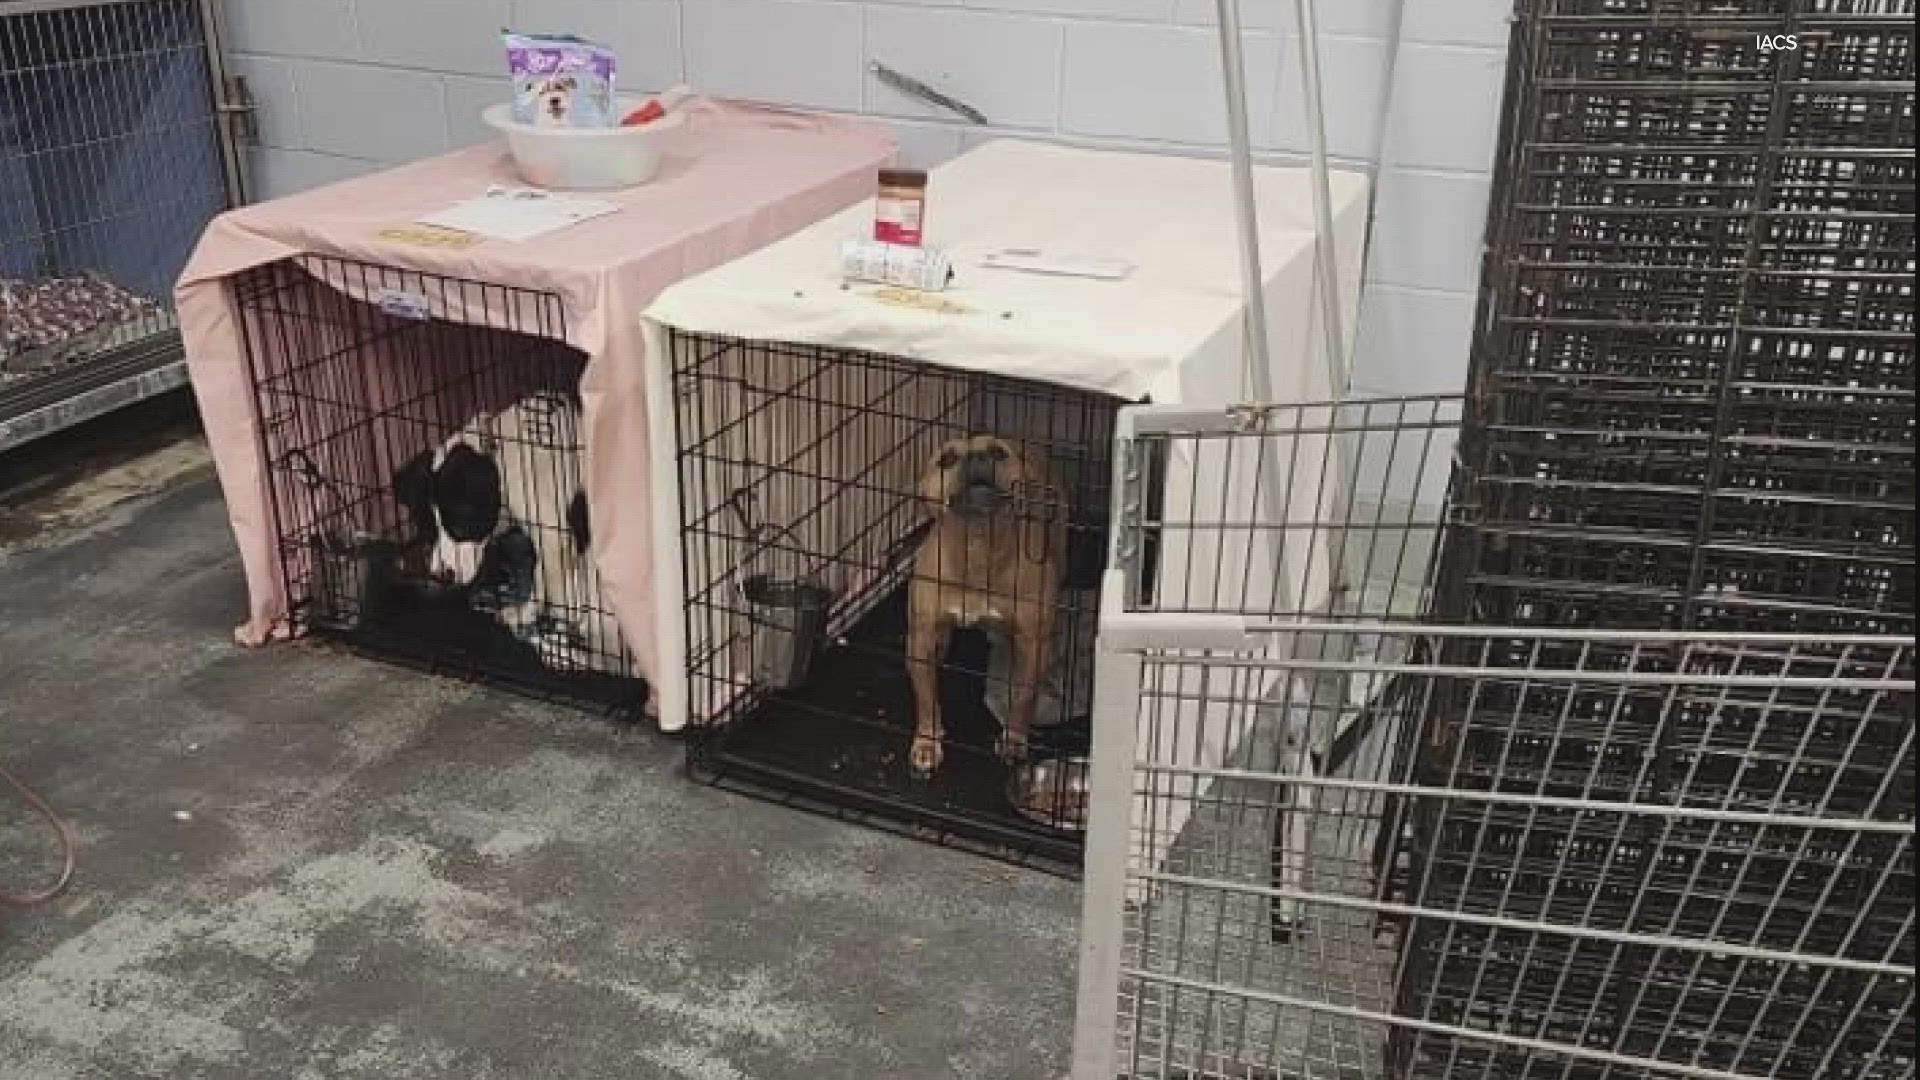 An Indianapolis shelter gave an update on the life-or-death danger it experienced this weekend, saying its plea to save pets in the shelter worked.